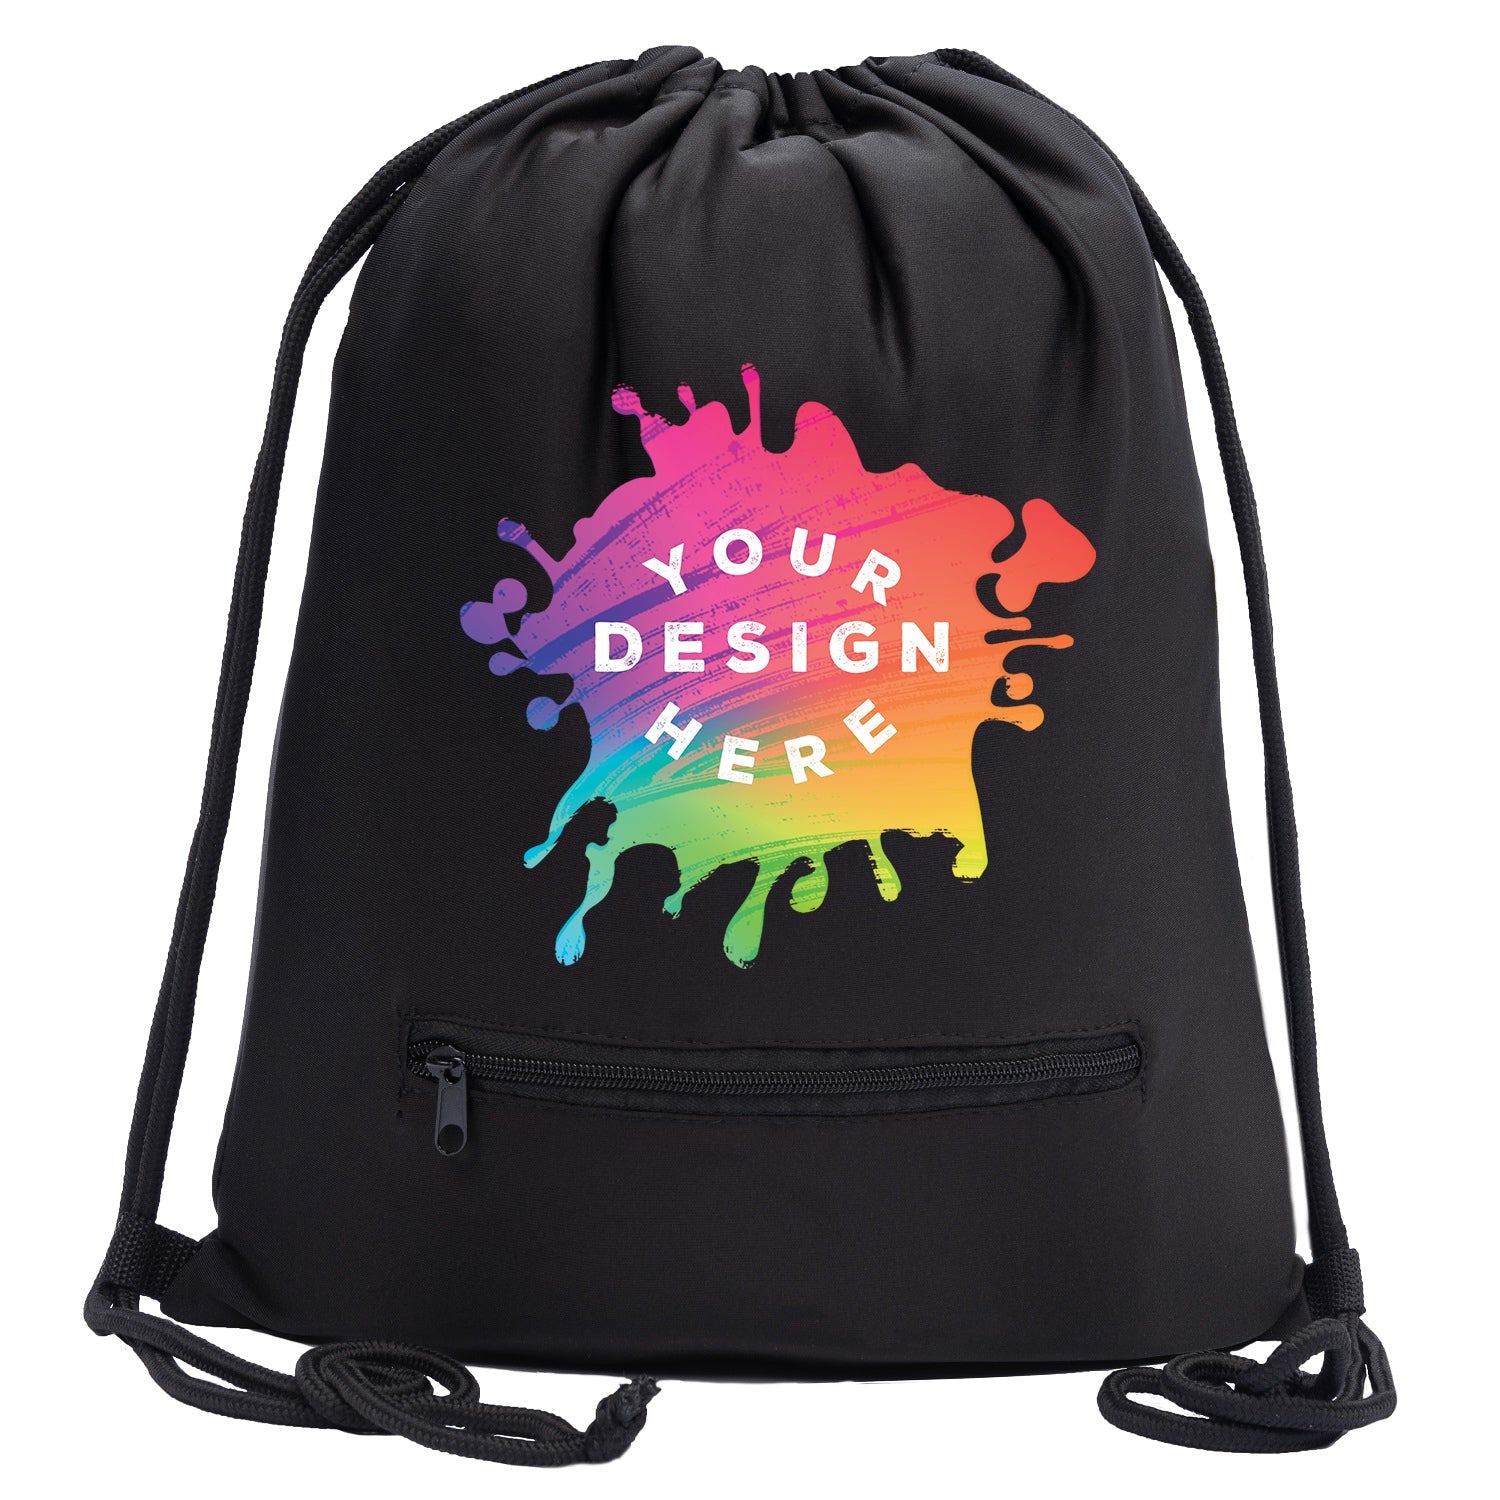 Promotional Drawstring Bags with Zipper Pocket